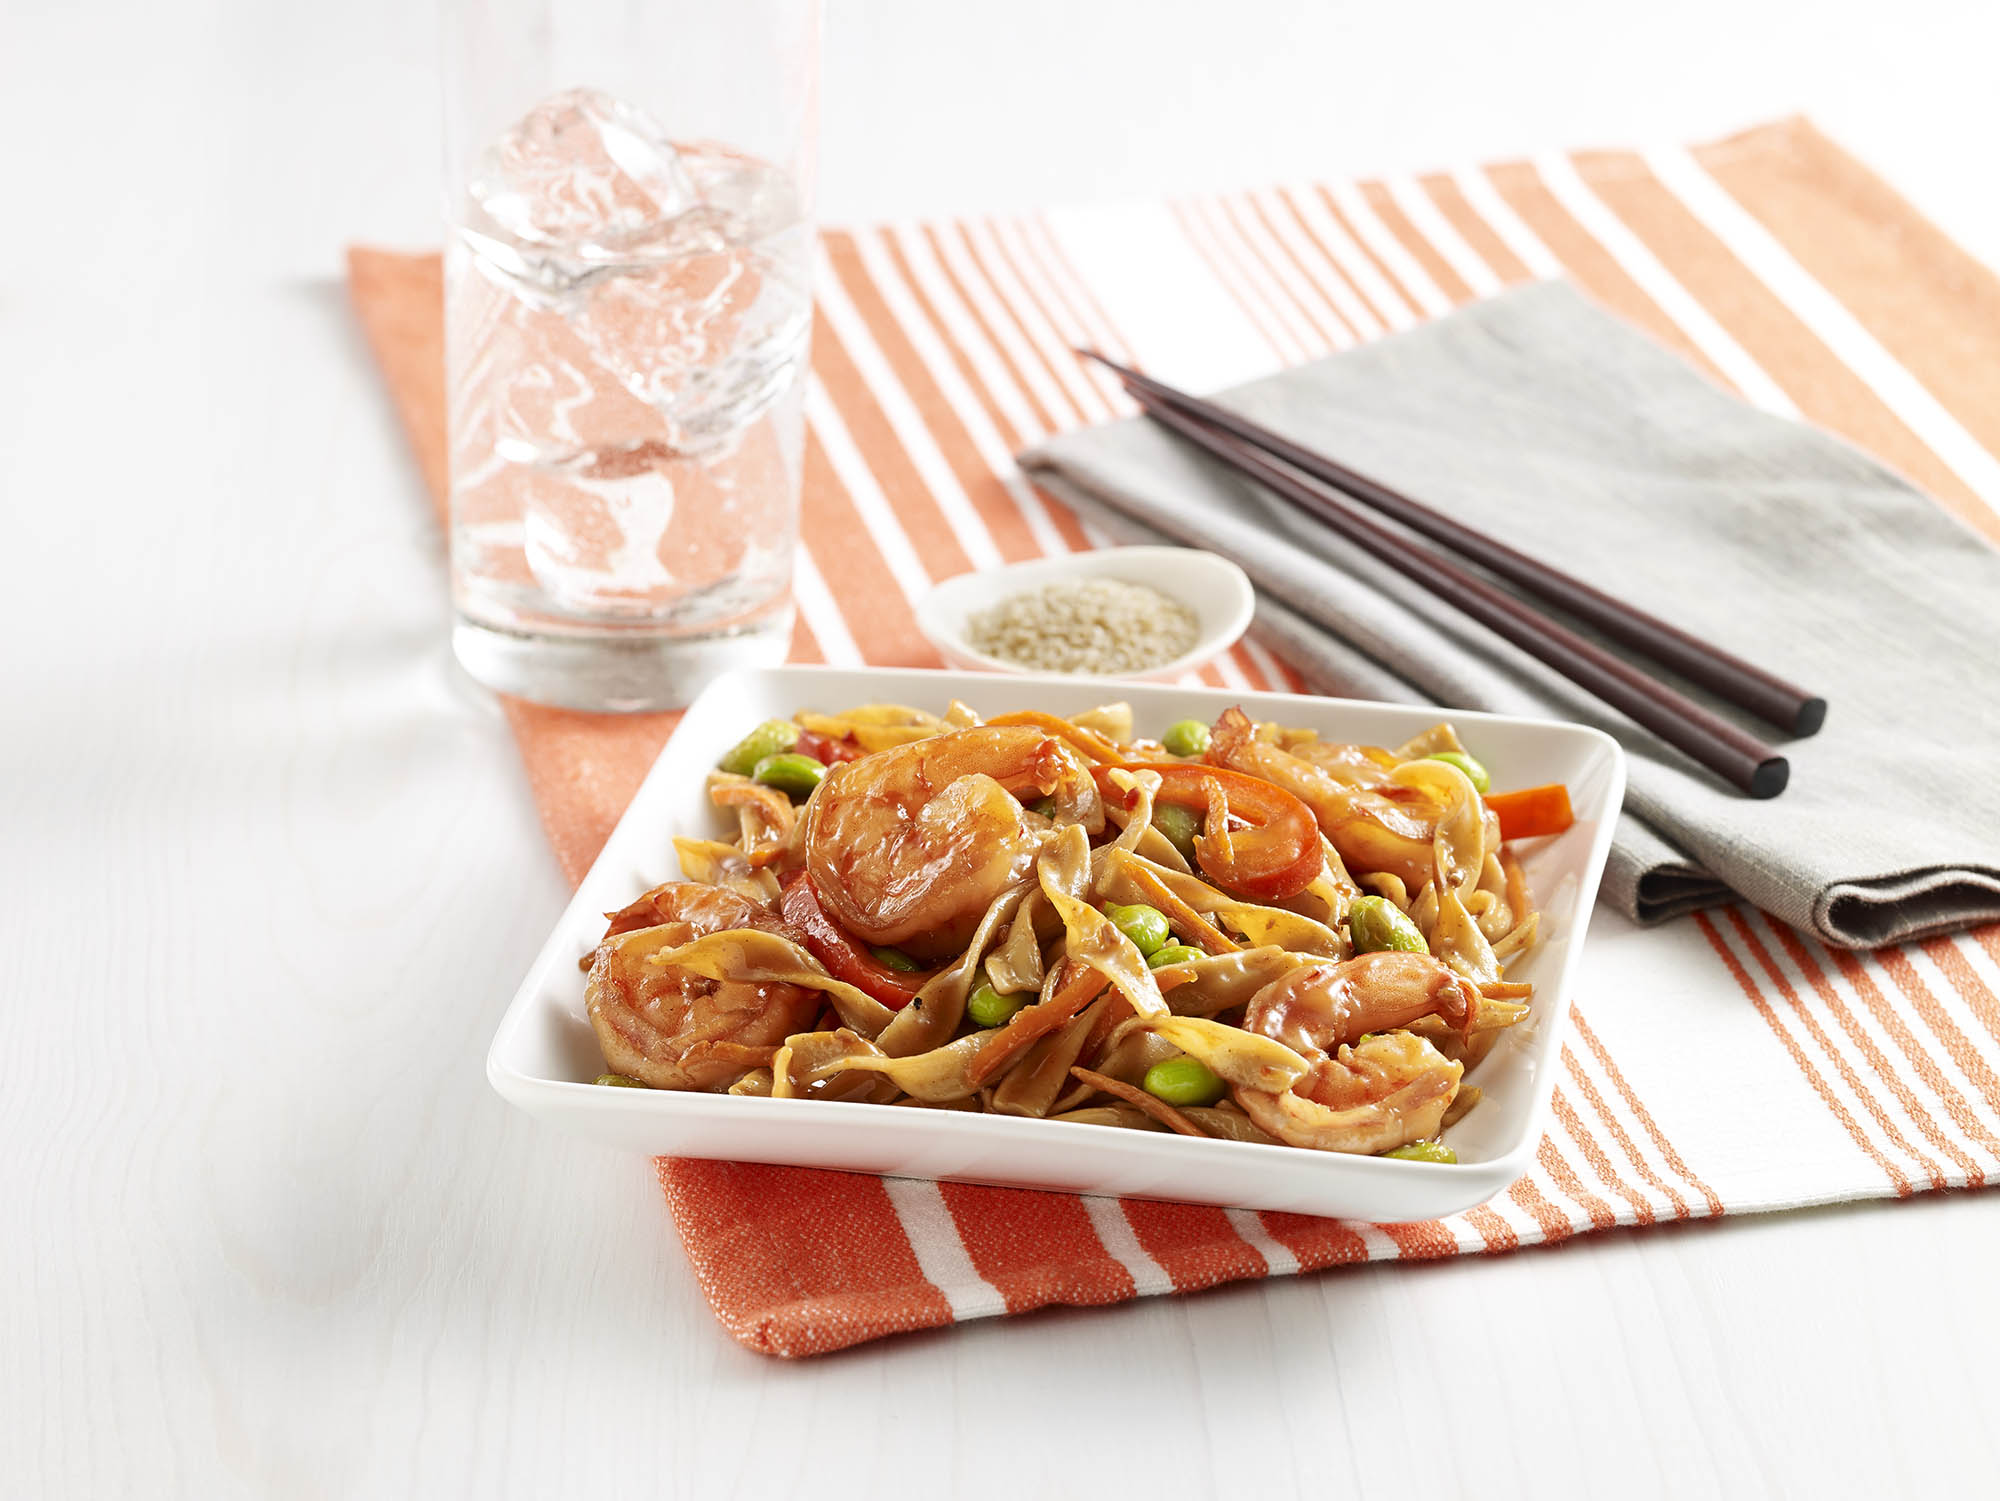 Pan Fried Noodles with Shrimp Pan fried egg noodle stir fry recipe combined with vegetables, shrimp and an Asian flavored sauce